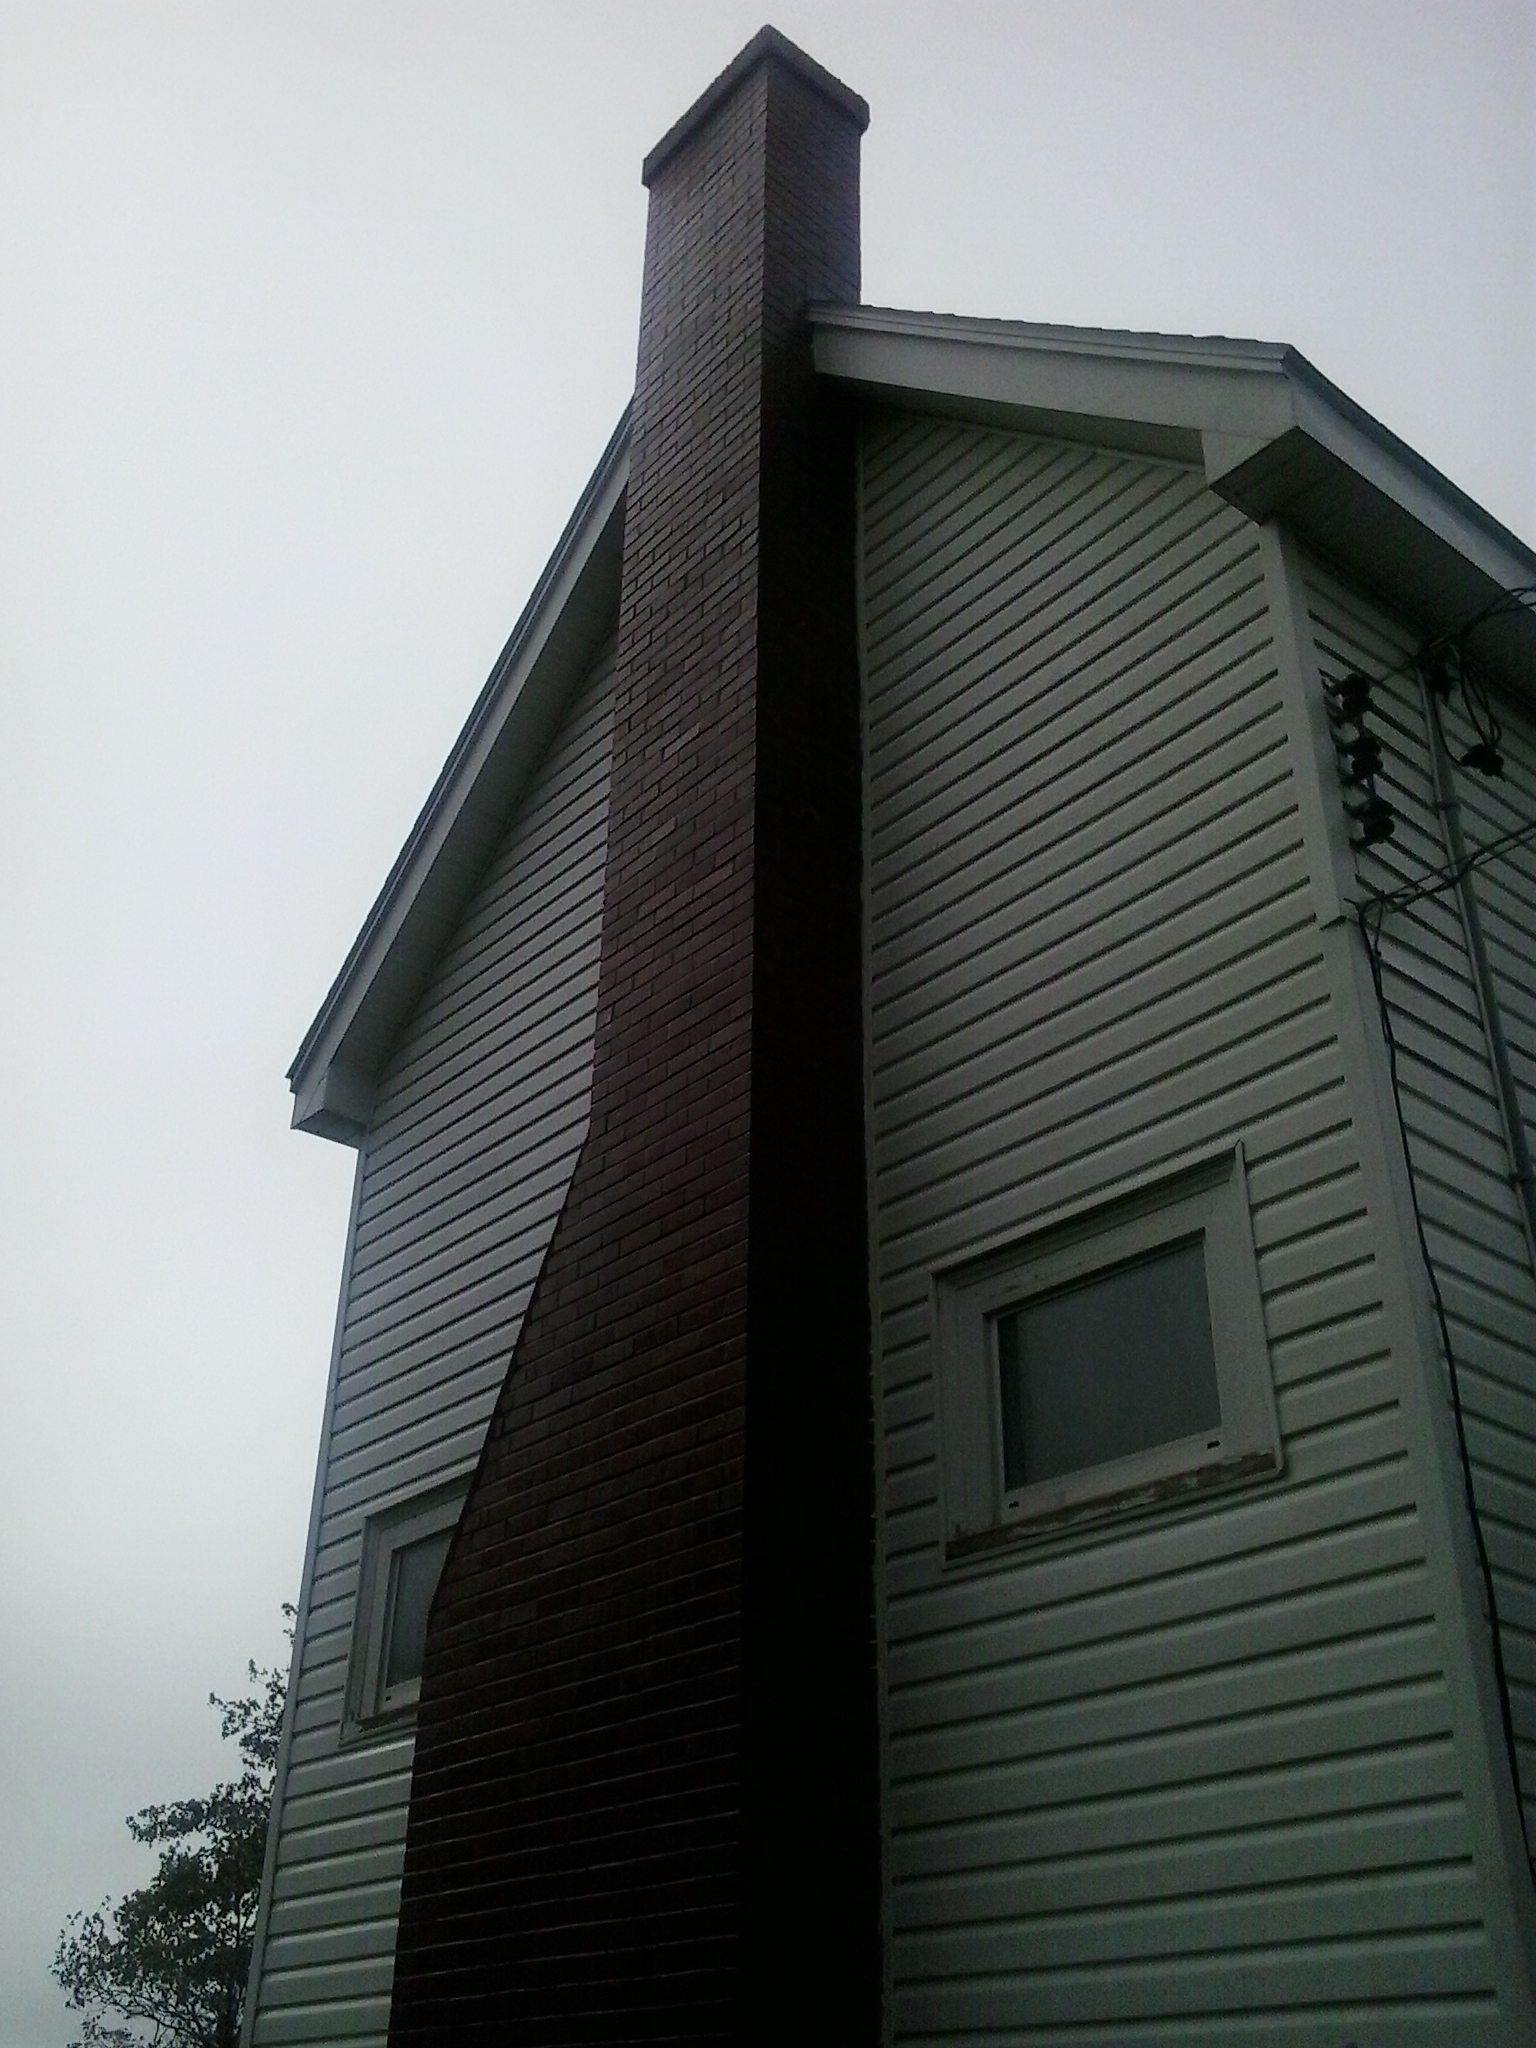 image of chimney-chimney repair services completed in Halifax-Dartmouth Regional Municipality, NS by Pro Chimney Services based in Halifax NS servicing all of the Halifax-Dartmouth Regional Municipality,Bedford, Sackville, Mount Uniacke, Windsor, Hantsport, Wolfville, Kentville, Chester, Mahone Bay, Lunenburg, Bridgewater, Liverpool, Fall River, Wellington, Enfield, Elmsdale, Brookfield, Truro, Musquodoboit Harbour & surrounding areas.